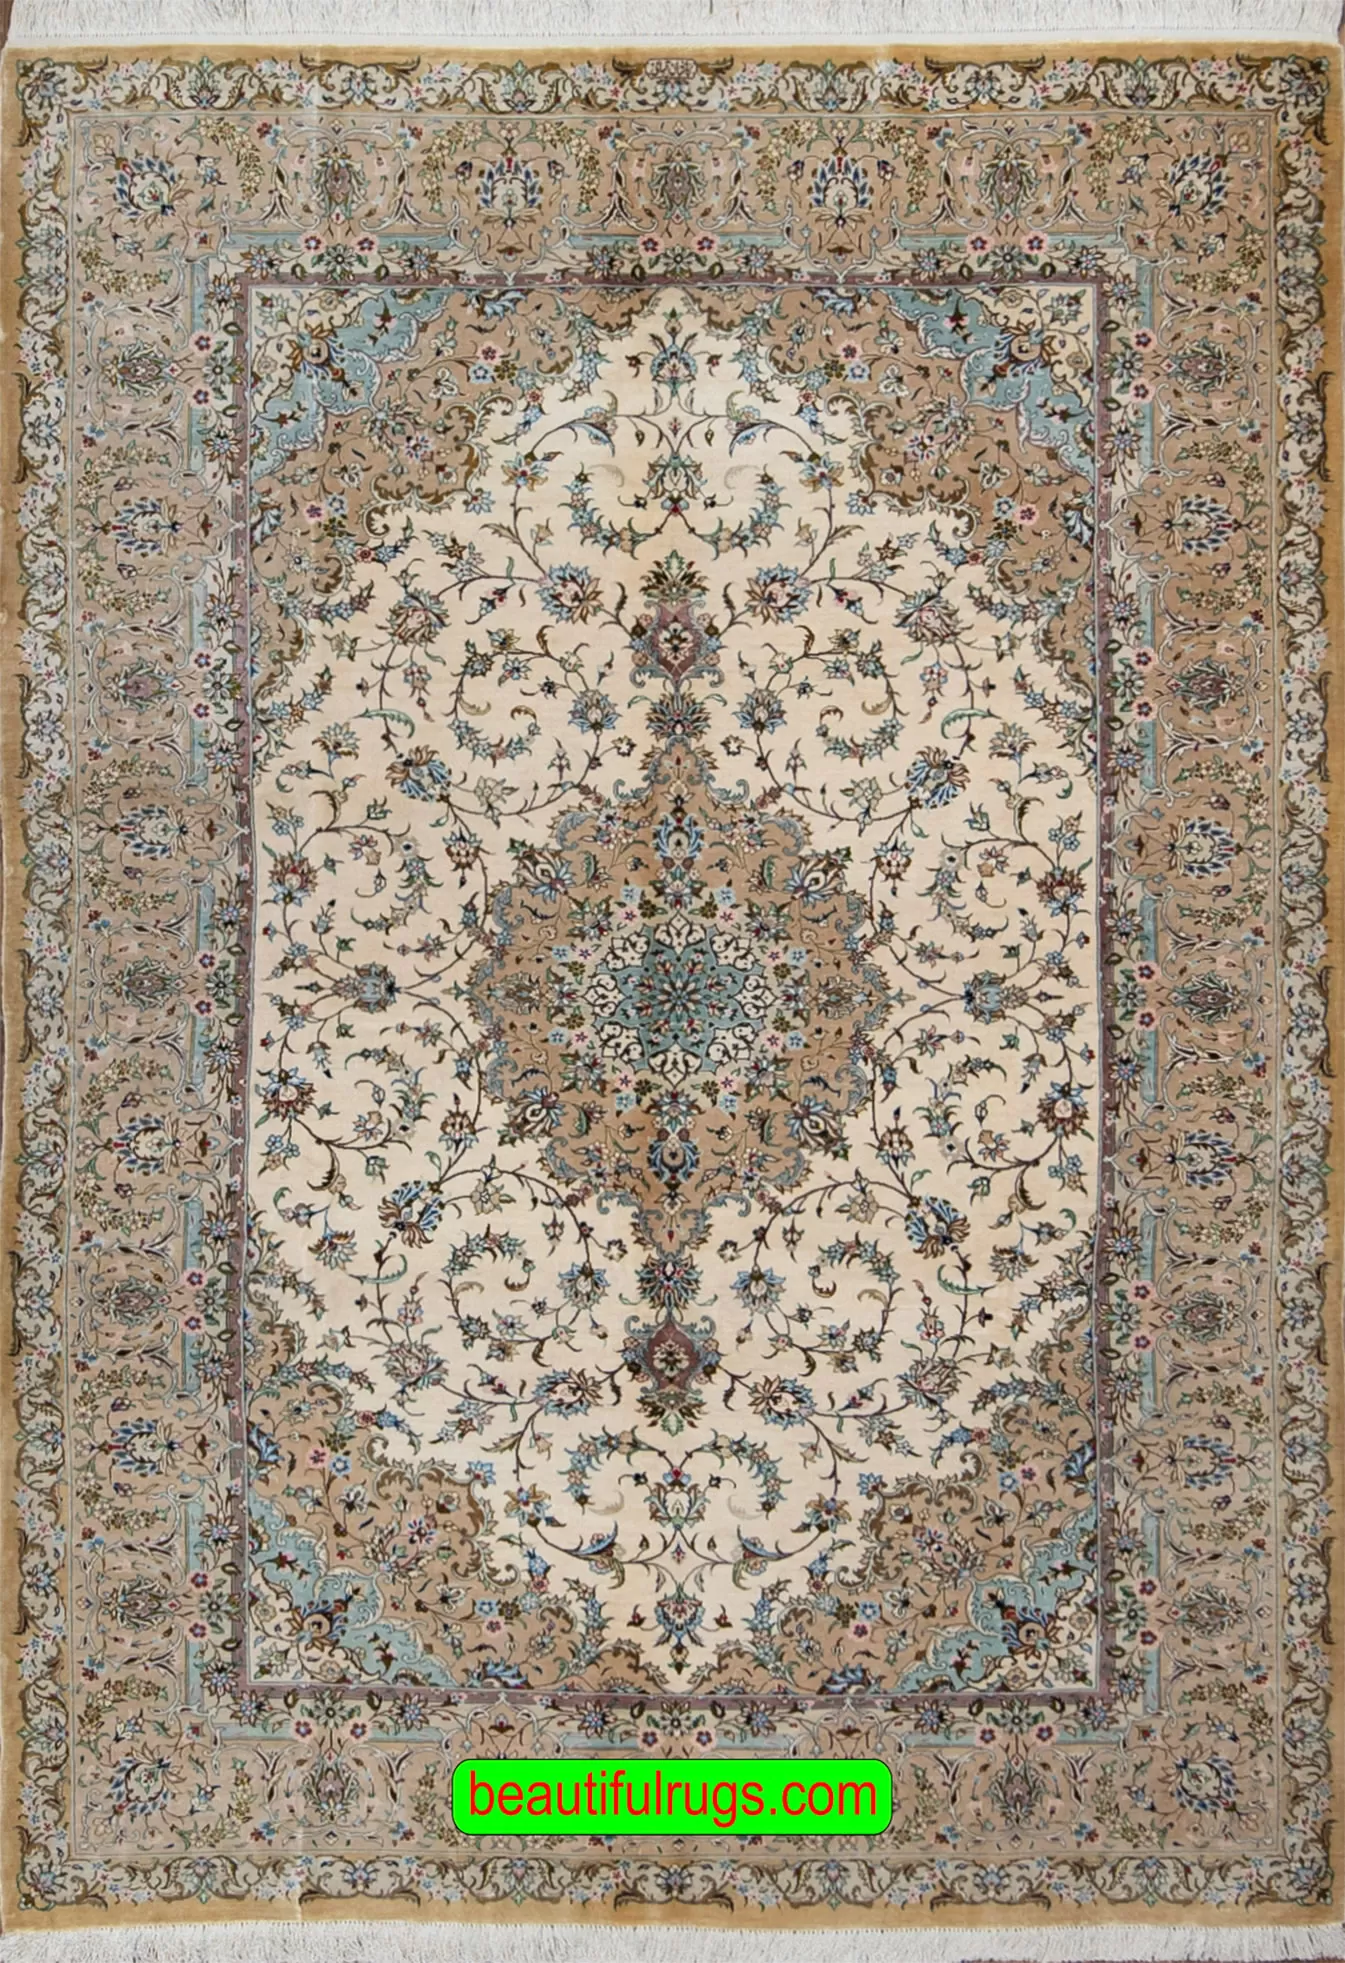 Pure silk Persian Kashan rug in beige and earth tone colors. Size 4.6x6.8.